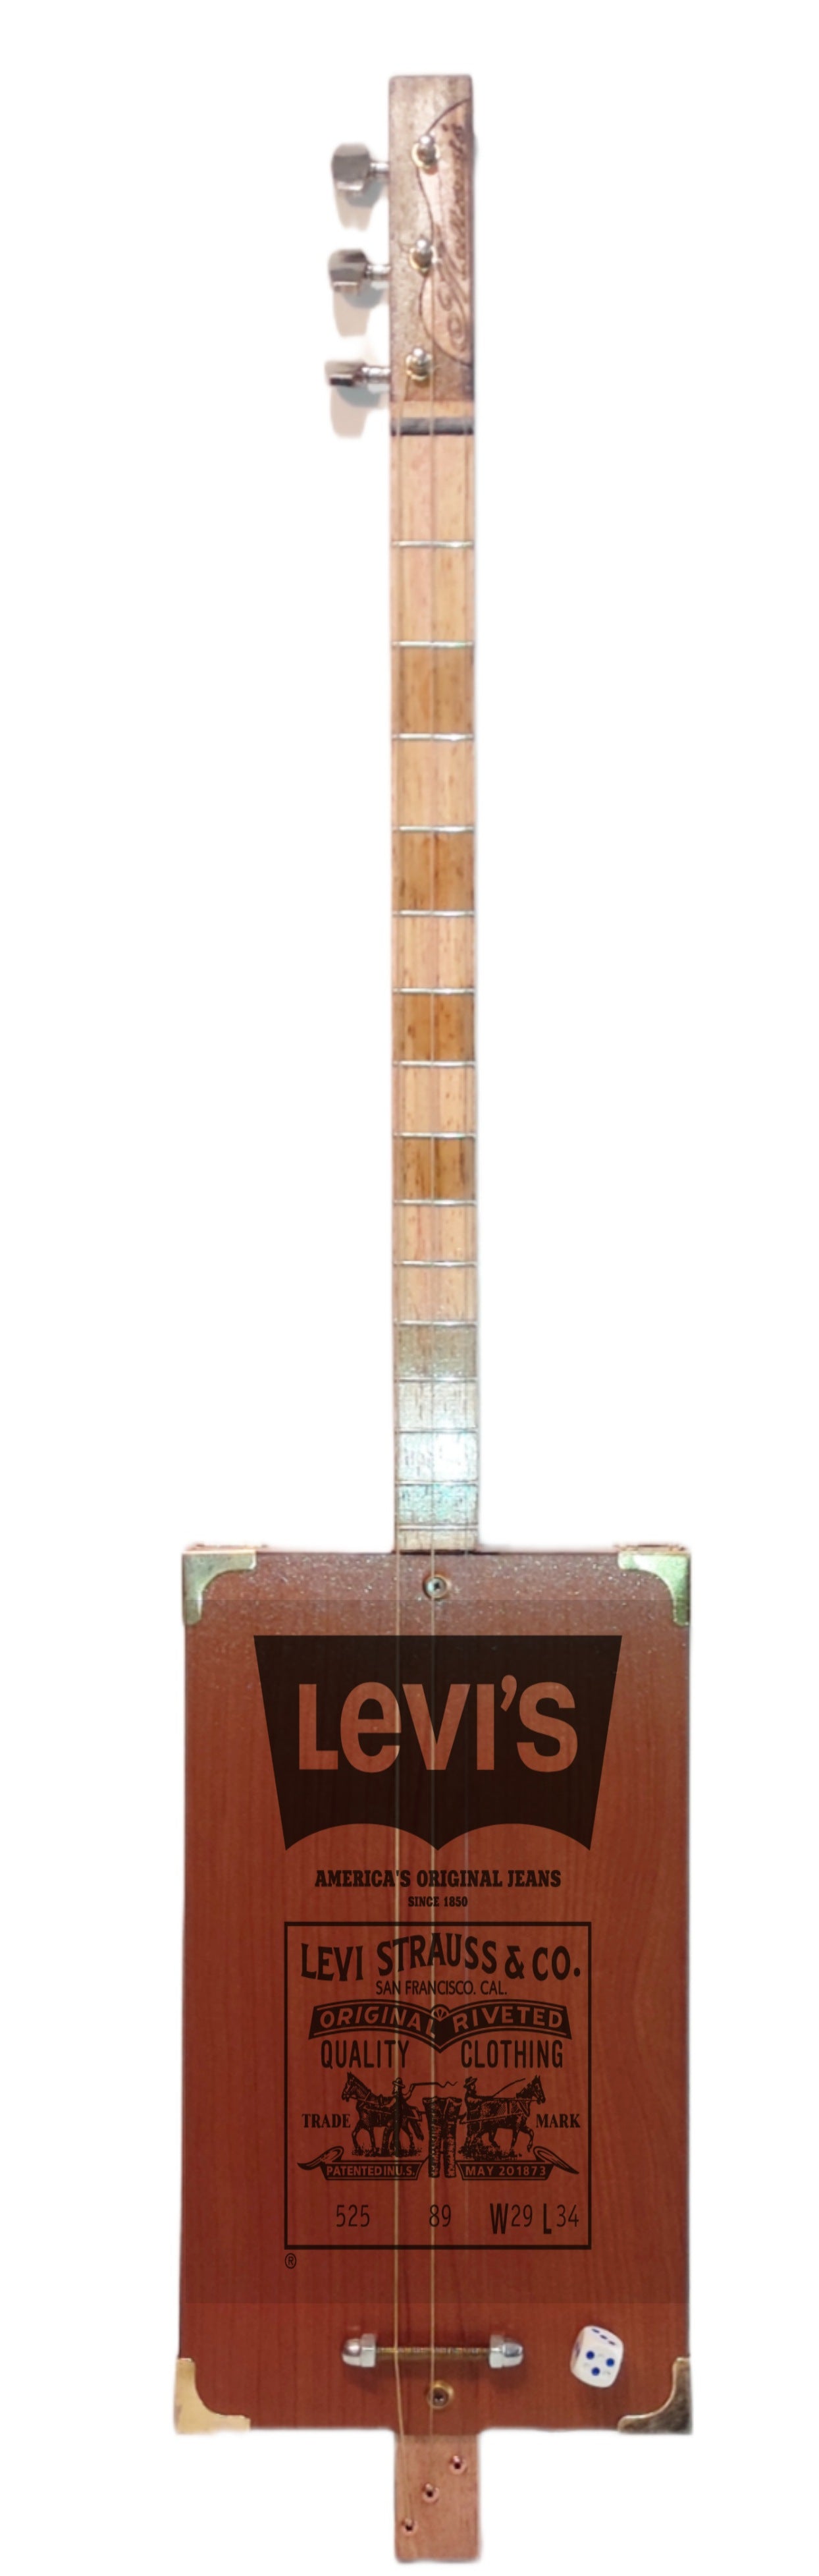 Levis tributo 3tpv cigar box guitar Matteacci's Made in Italy